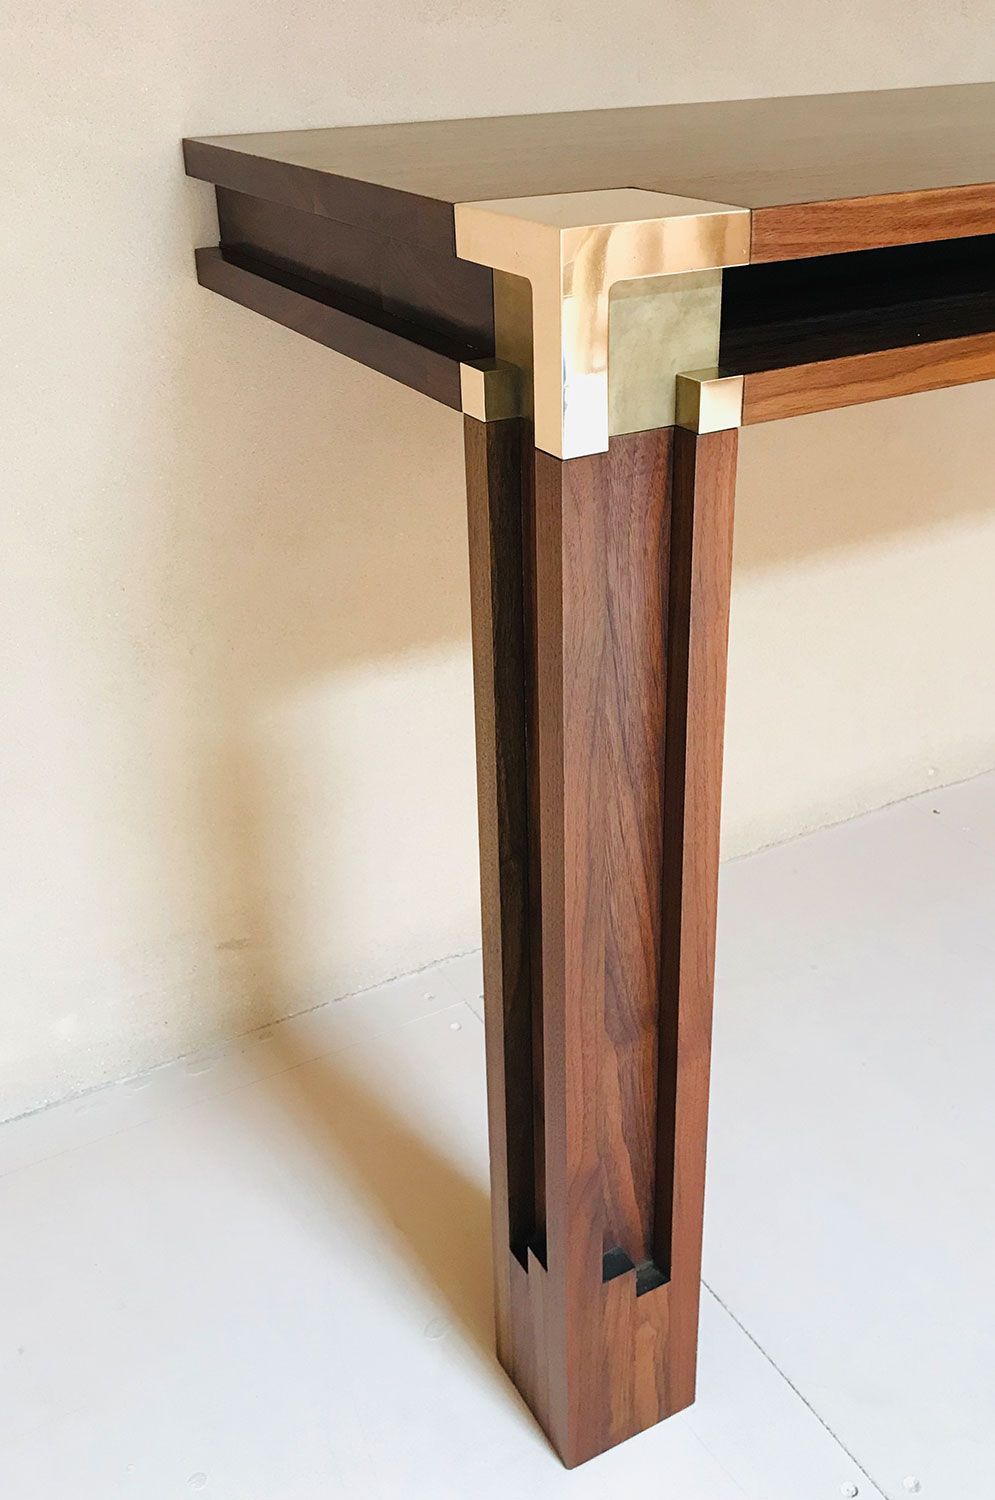 A wooden table with a brass corner is sitting on a white floor.